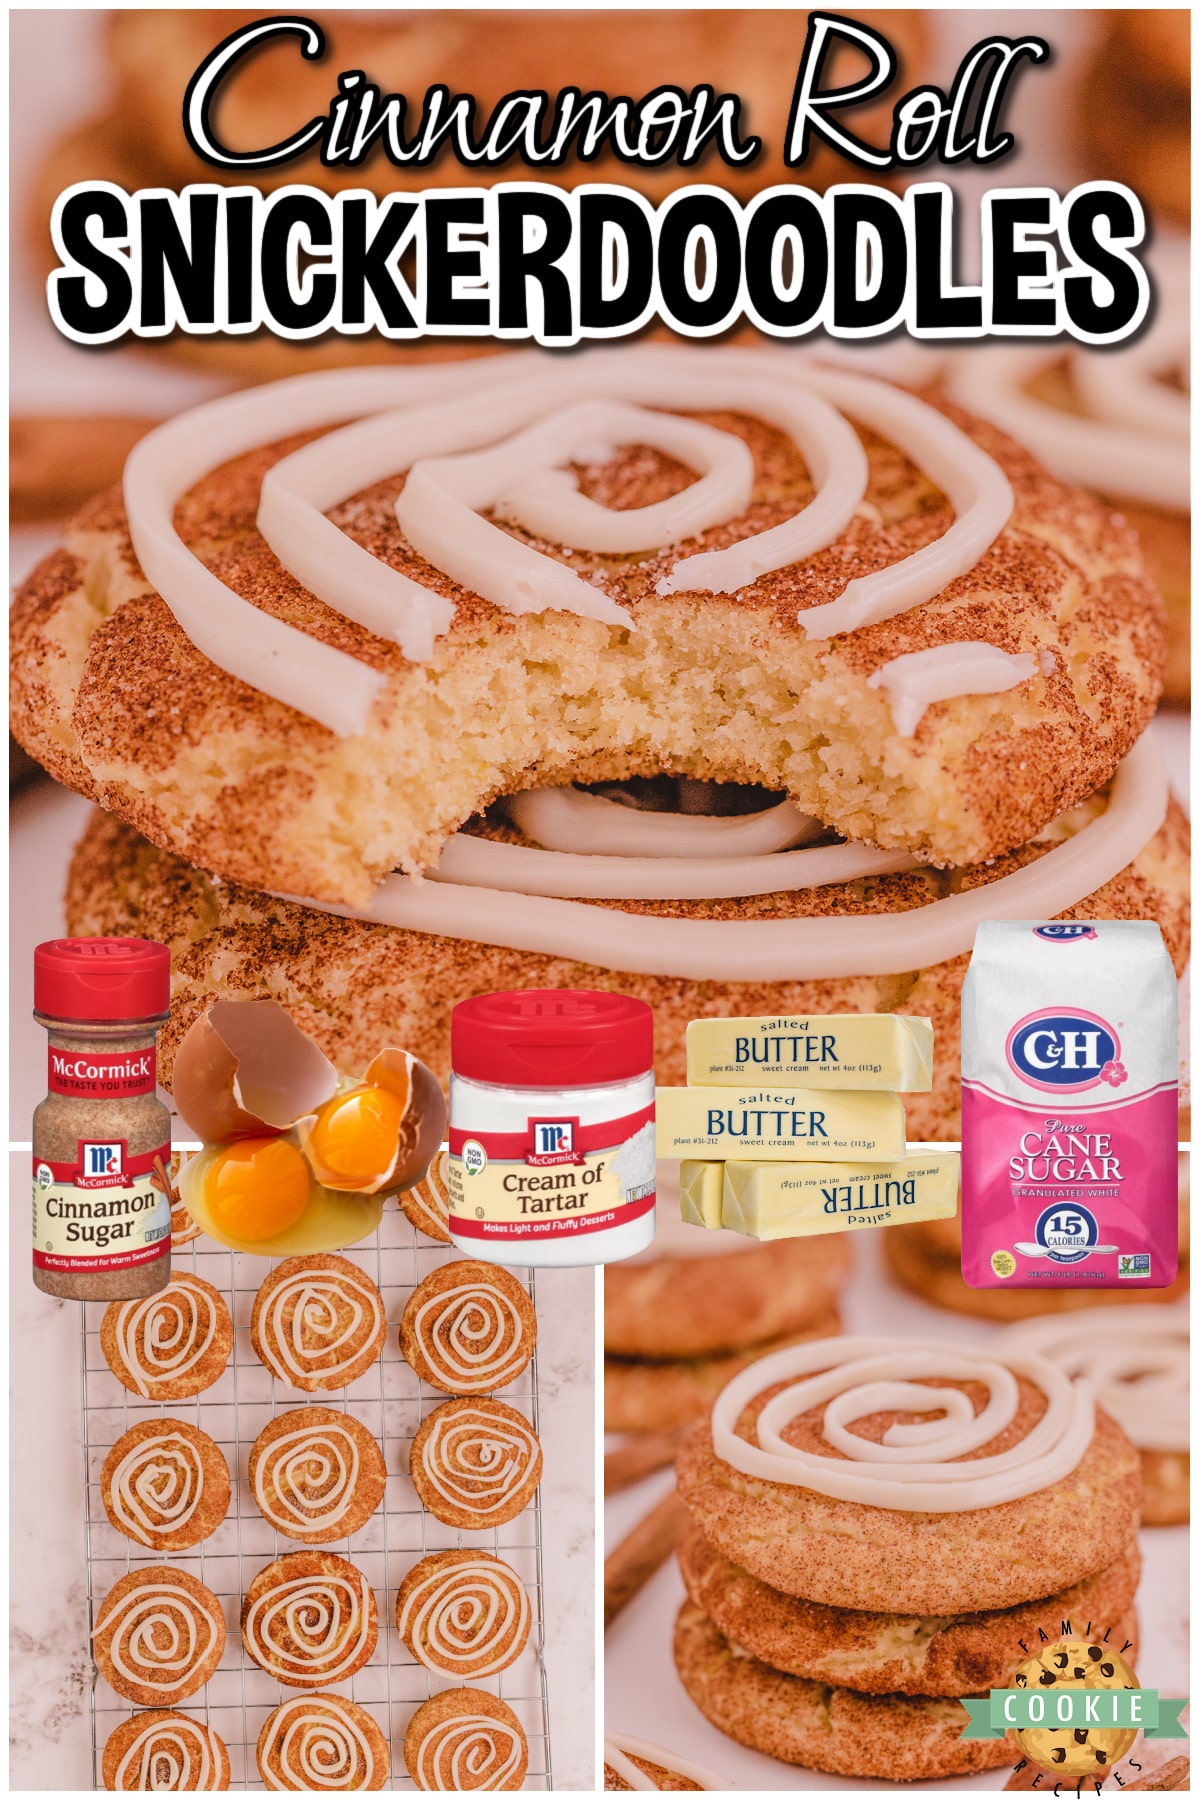 Cinnamon Roll Snickerdoodles are your favorite snickerdoodle cookies with the addition of a sweet vanilla frosting swirl on top!